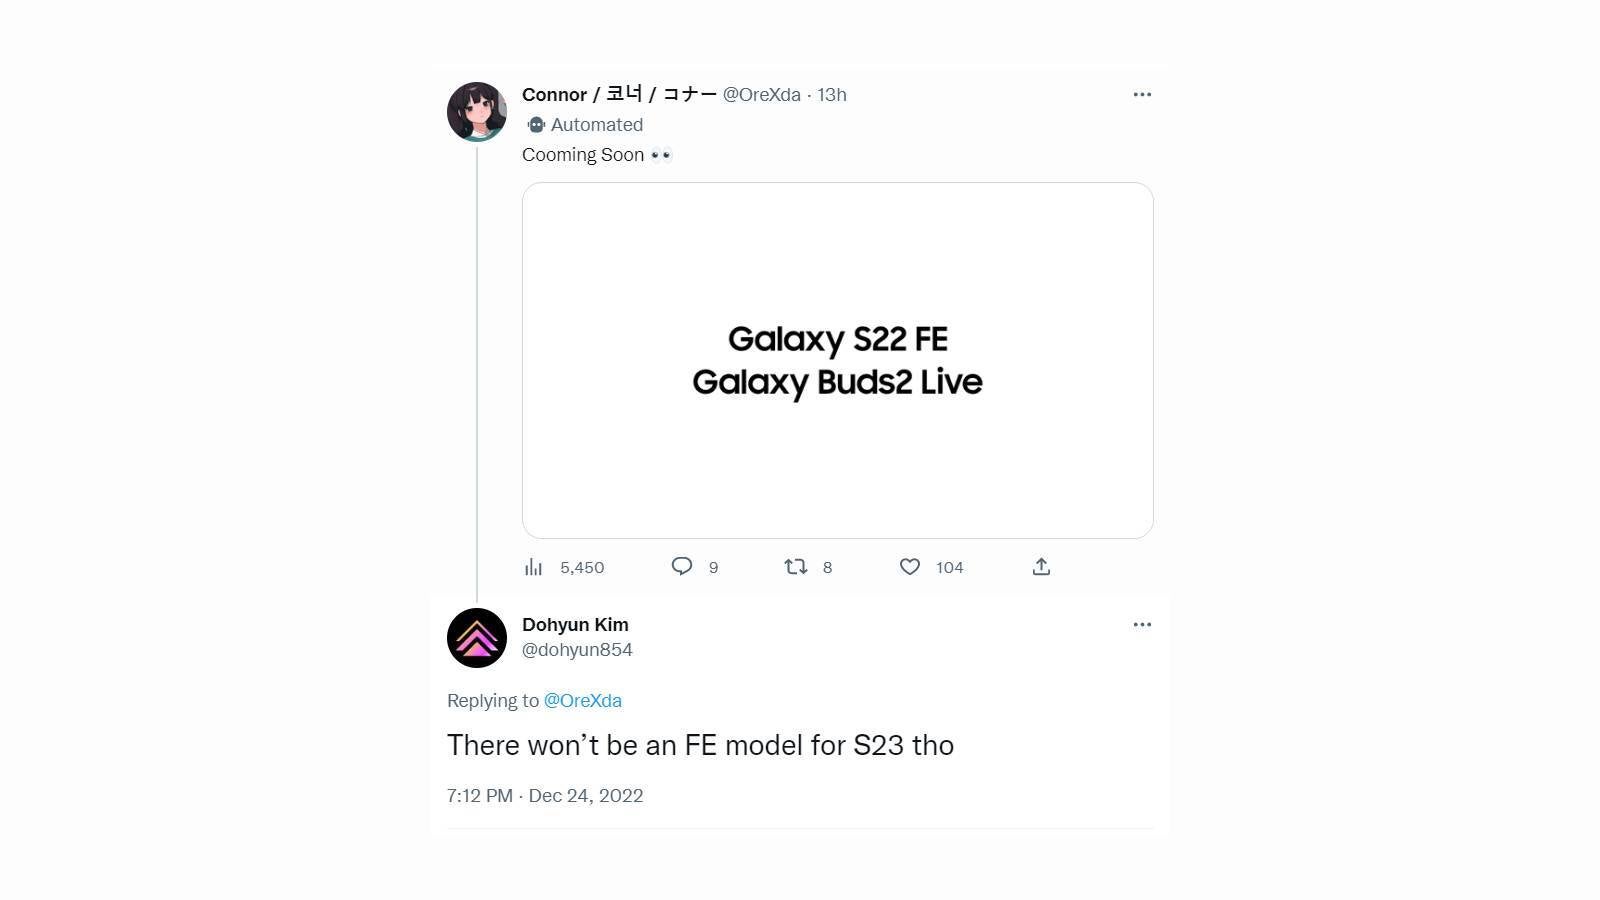 The Galaxy S22 FE appears to be in the pipeline - Galaxy S22 FE apparently does exist after all and it's coming soon with Exynos 2300